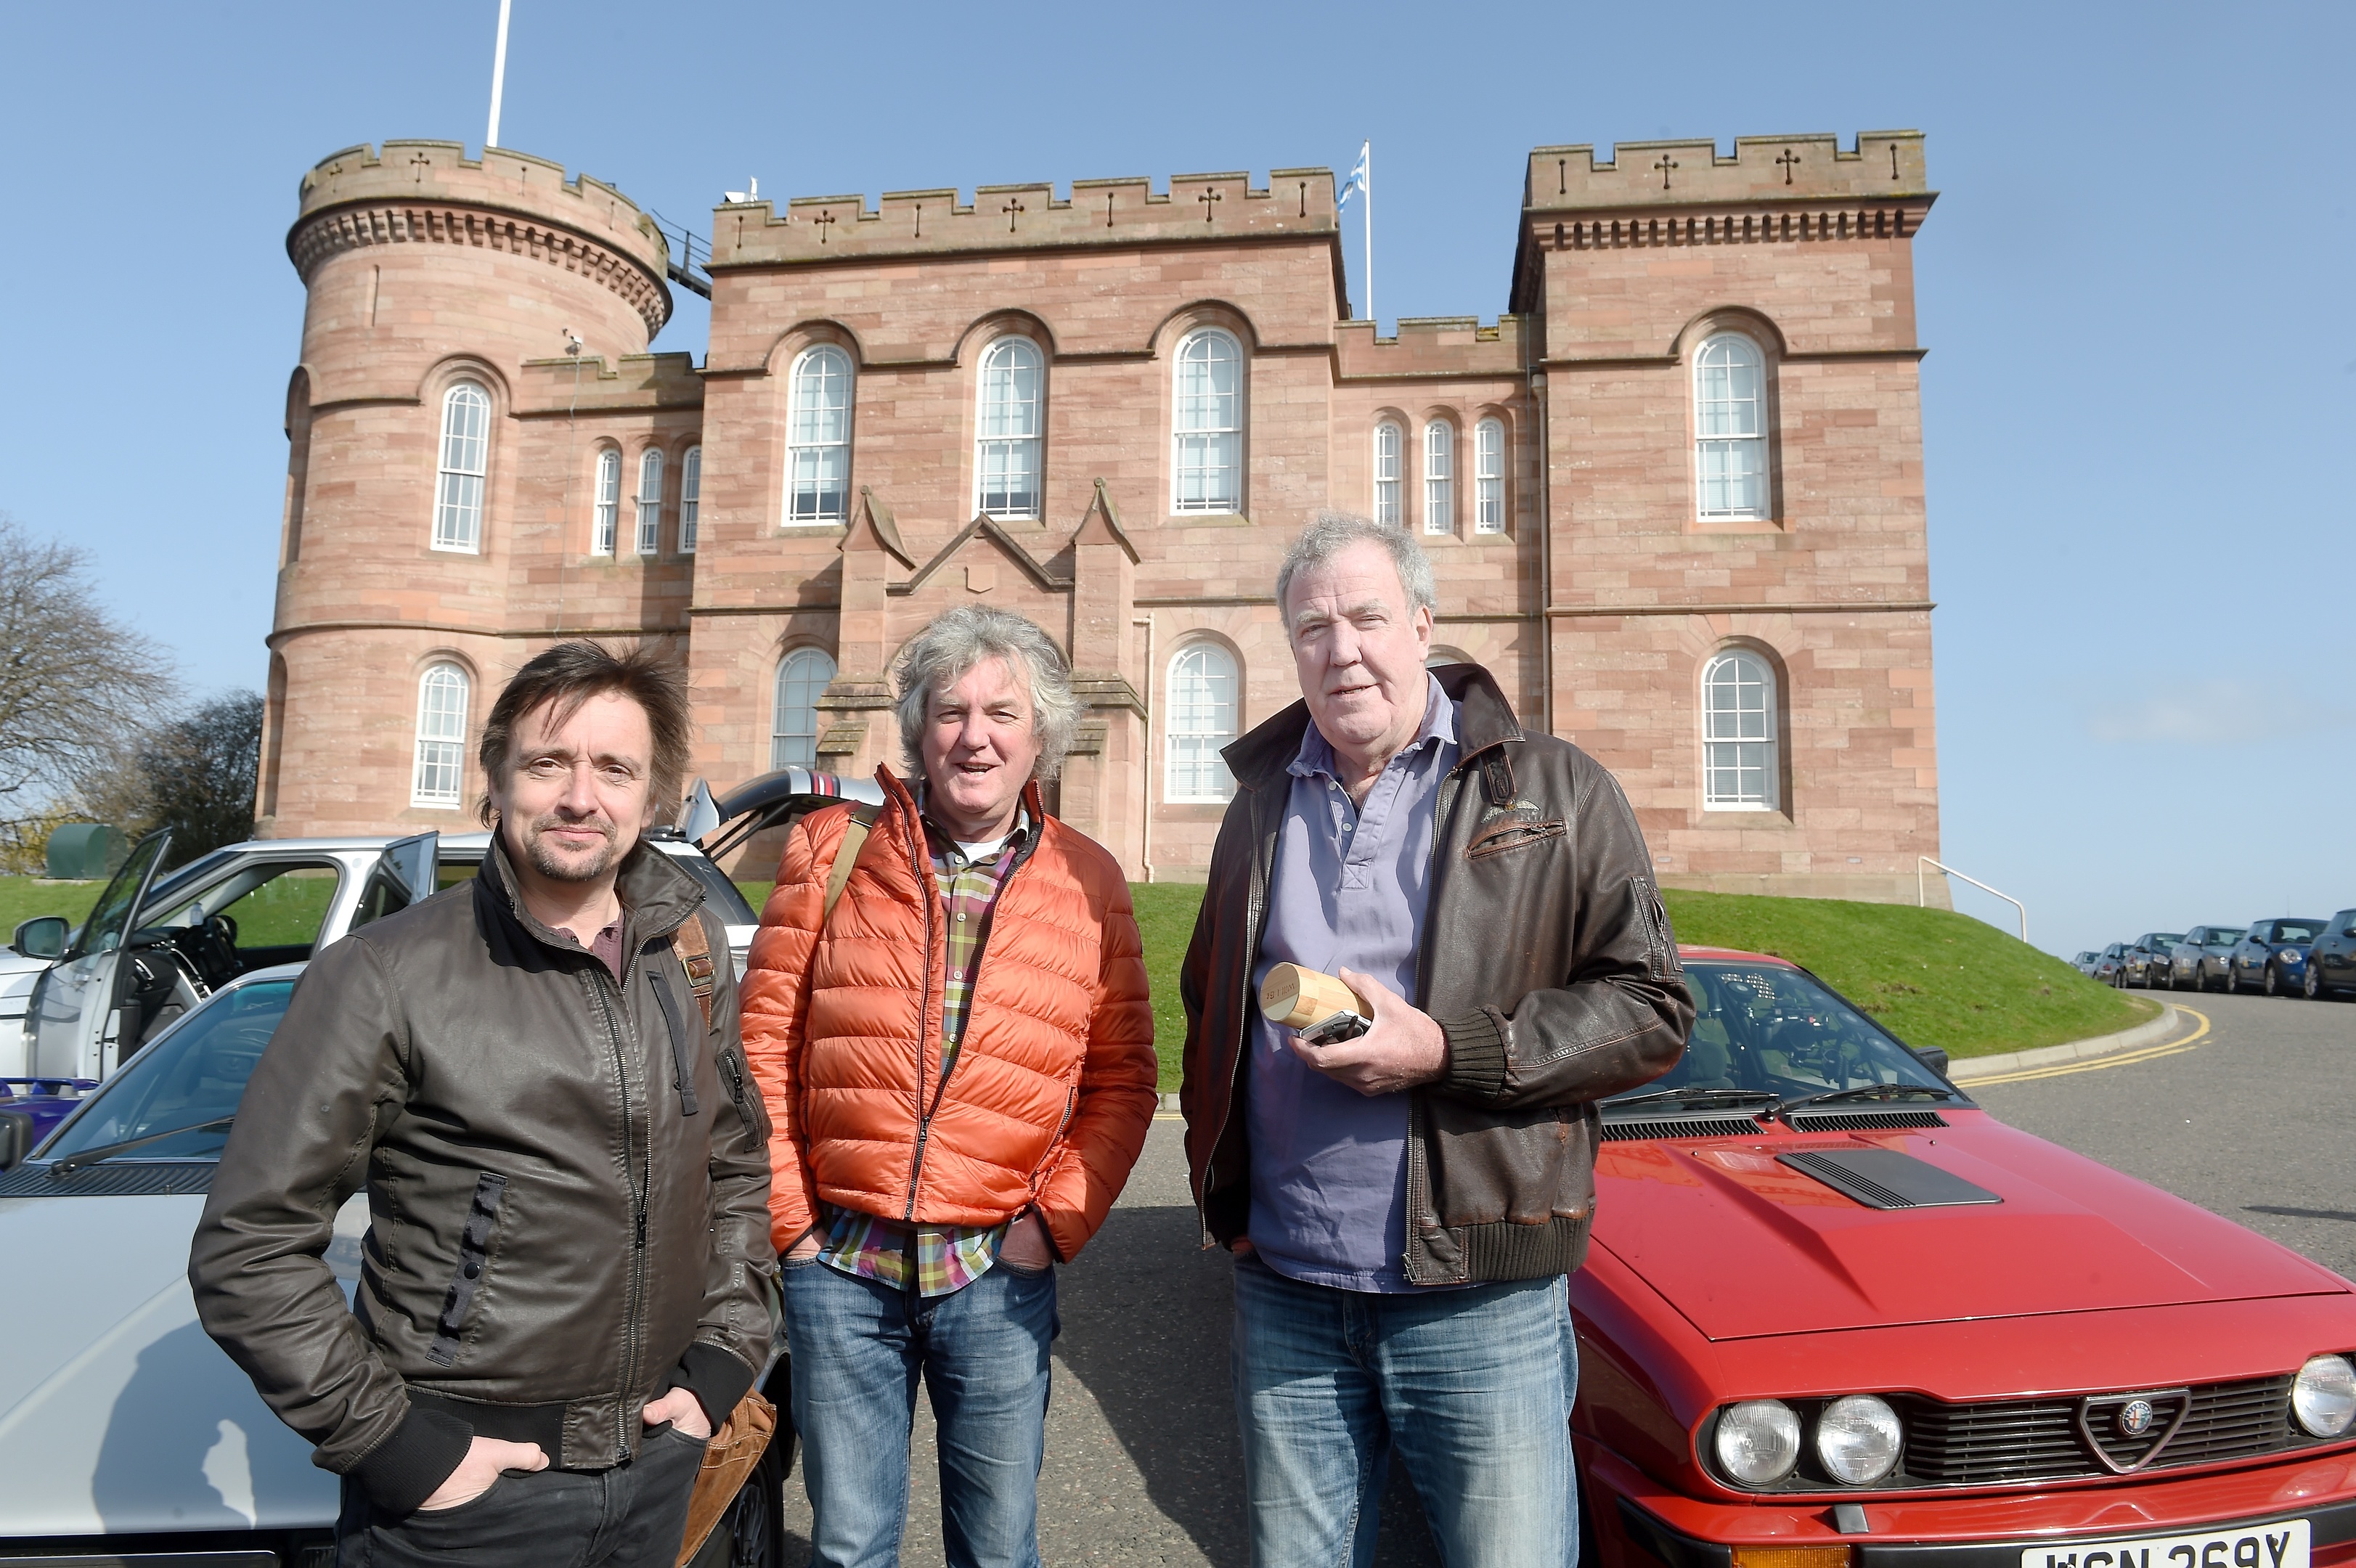 'The Grand Tour' with Richard Hammond, James May and Jeremy Clarkson finished their North Coast 500 filming at Inverness Castle yesterday.